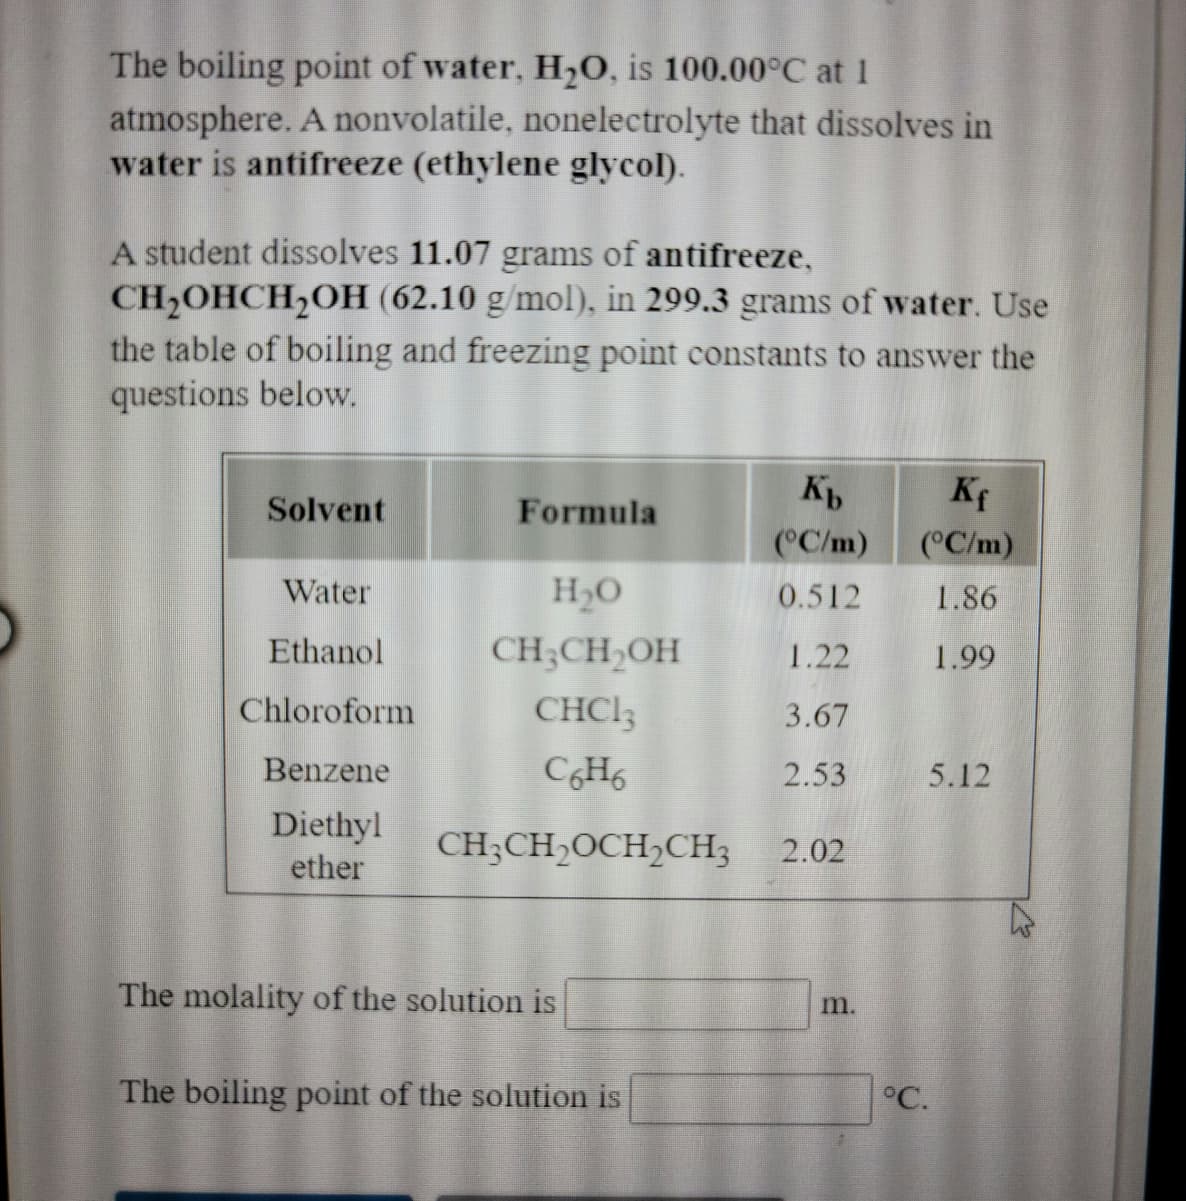 The boiling point of water, H,0, is 100.00°C at 1
atmosphere. A nonvolatile, nonelectrolyte that dissolves in
water is antifreeze (ethylene glycol).
A student dissolves 11.07 grams of antifreeze,
CH2OHCH2OH (62.10 g/mol), in 299.3 grams of water. Use
the table of boiling and freezing point constants to answer the
questions below.
Kf
Solvent
Formula
(°C/m)
(°C/m)
Water
H2O
0.512
1.86
Ethanol
CH;CH,OH
1.22
1.99
Chloroform
CHCI3
3.67
Benzene
CH6
2.53
5.12
Diethyl
ether
CH;CH,OCH2CH3
2.02
The molality of the solution is
m.
The boiling point of the solution is
°C.
